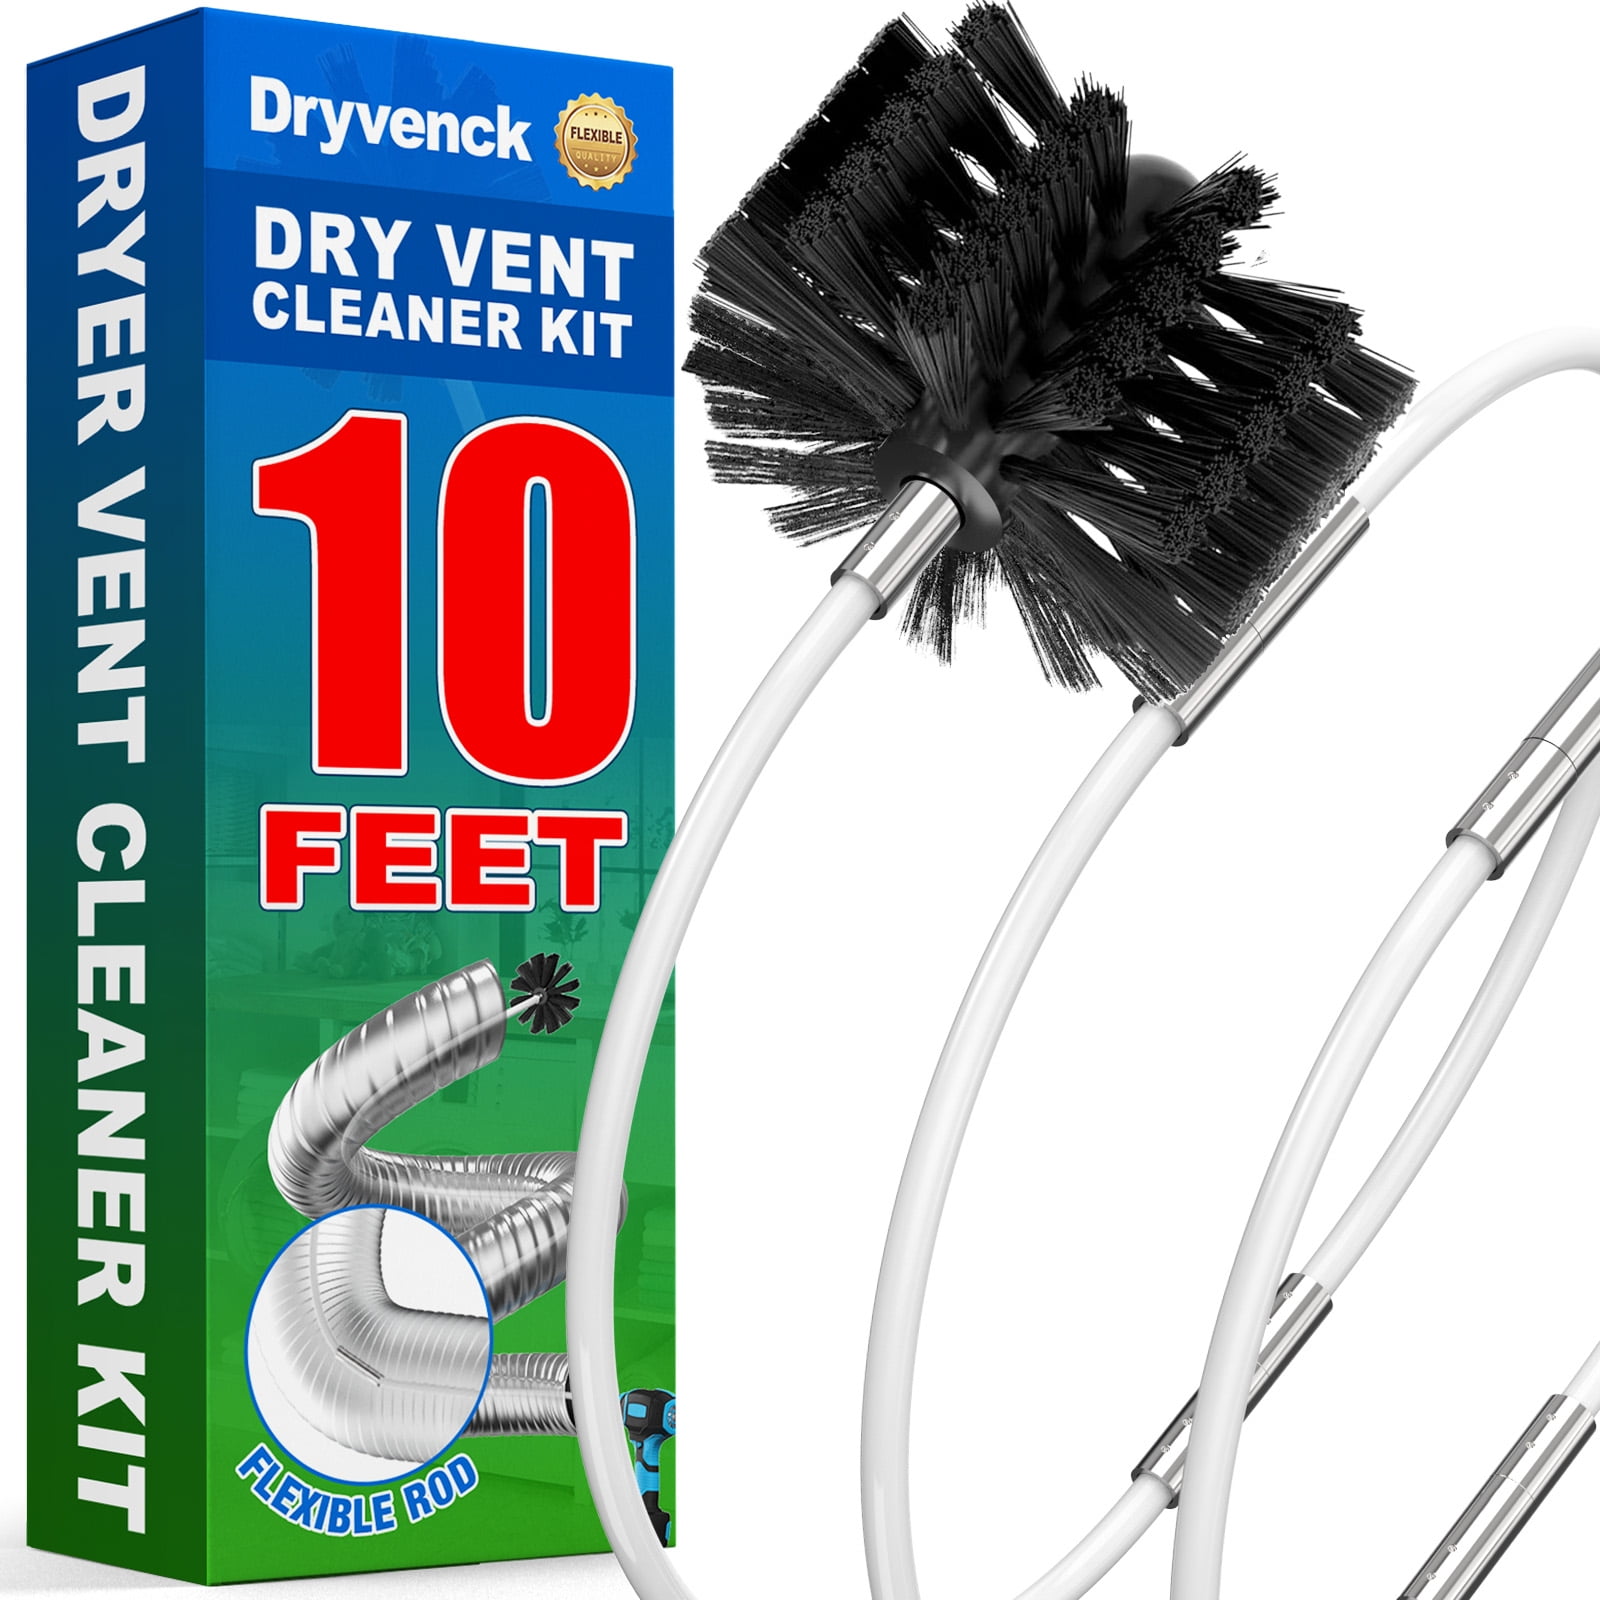 Dryvenck 10FT Dryer Vent Cleaner Kit,Flexible Lint Brush with Drill  Attachment,Dryer Cleaner Brush for Easy Cleaning